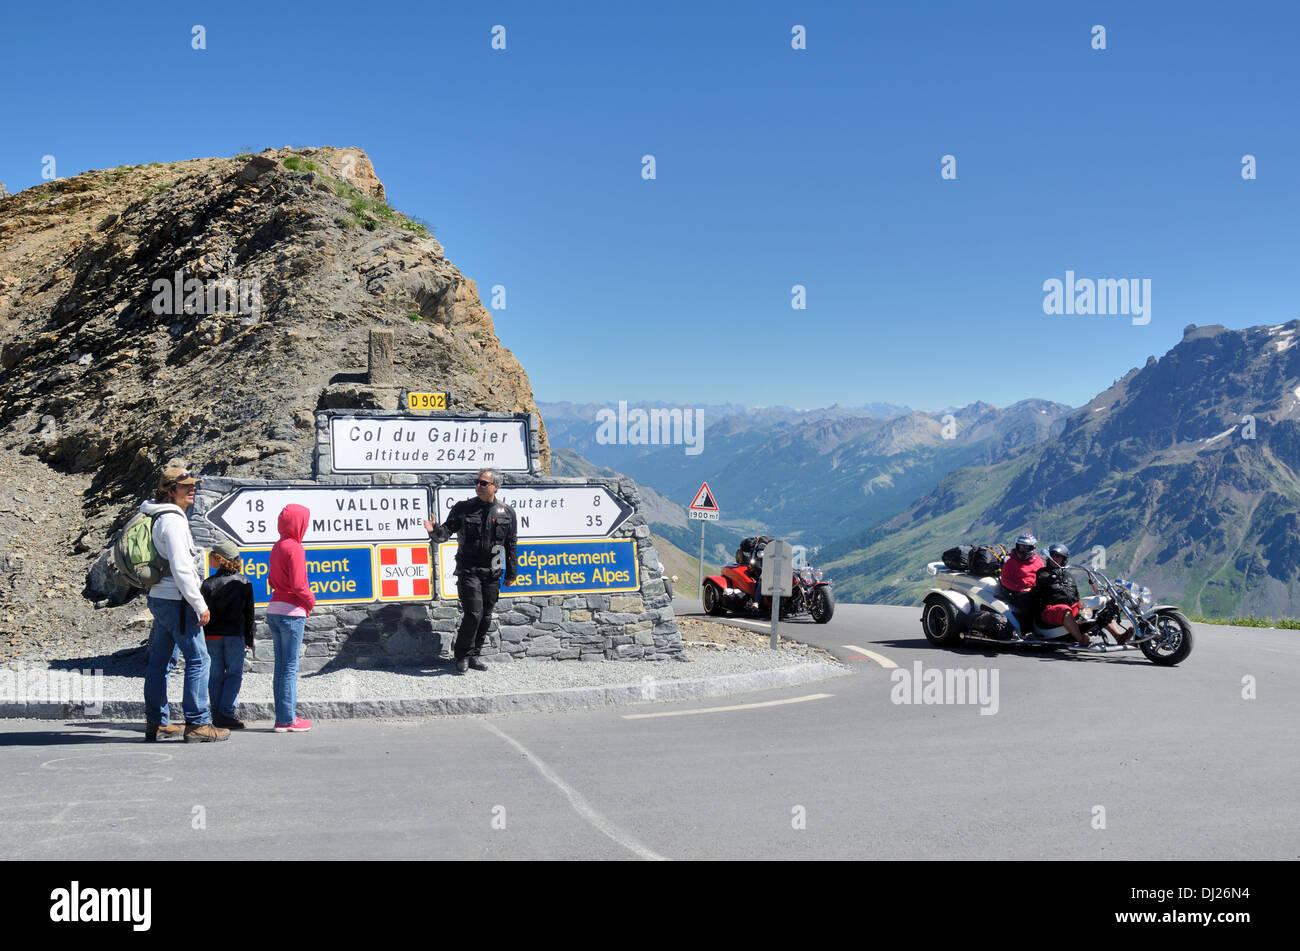 Tourists, Motorcyclists & Bikers at the Col du Galibier Mountain Pass between Savoie & Hautes-Alpes French Alps France Stock Photo